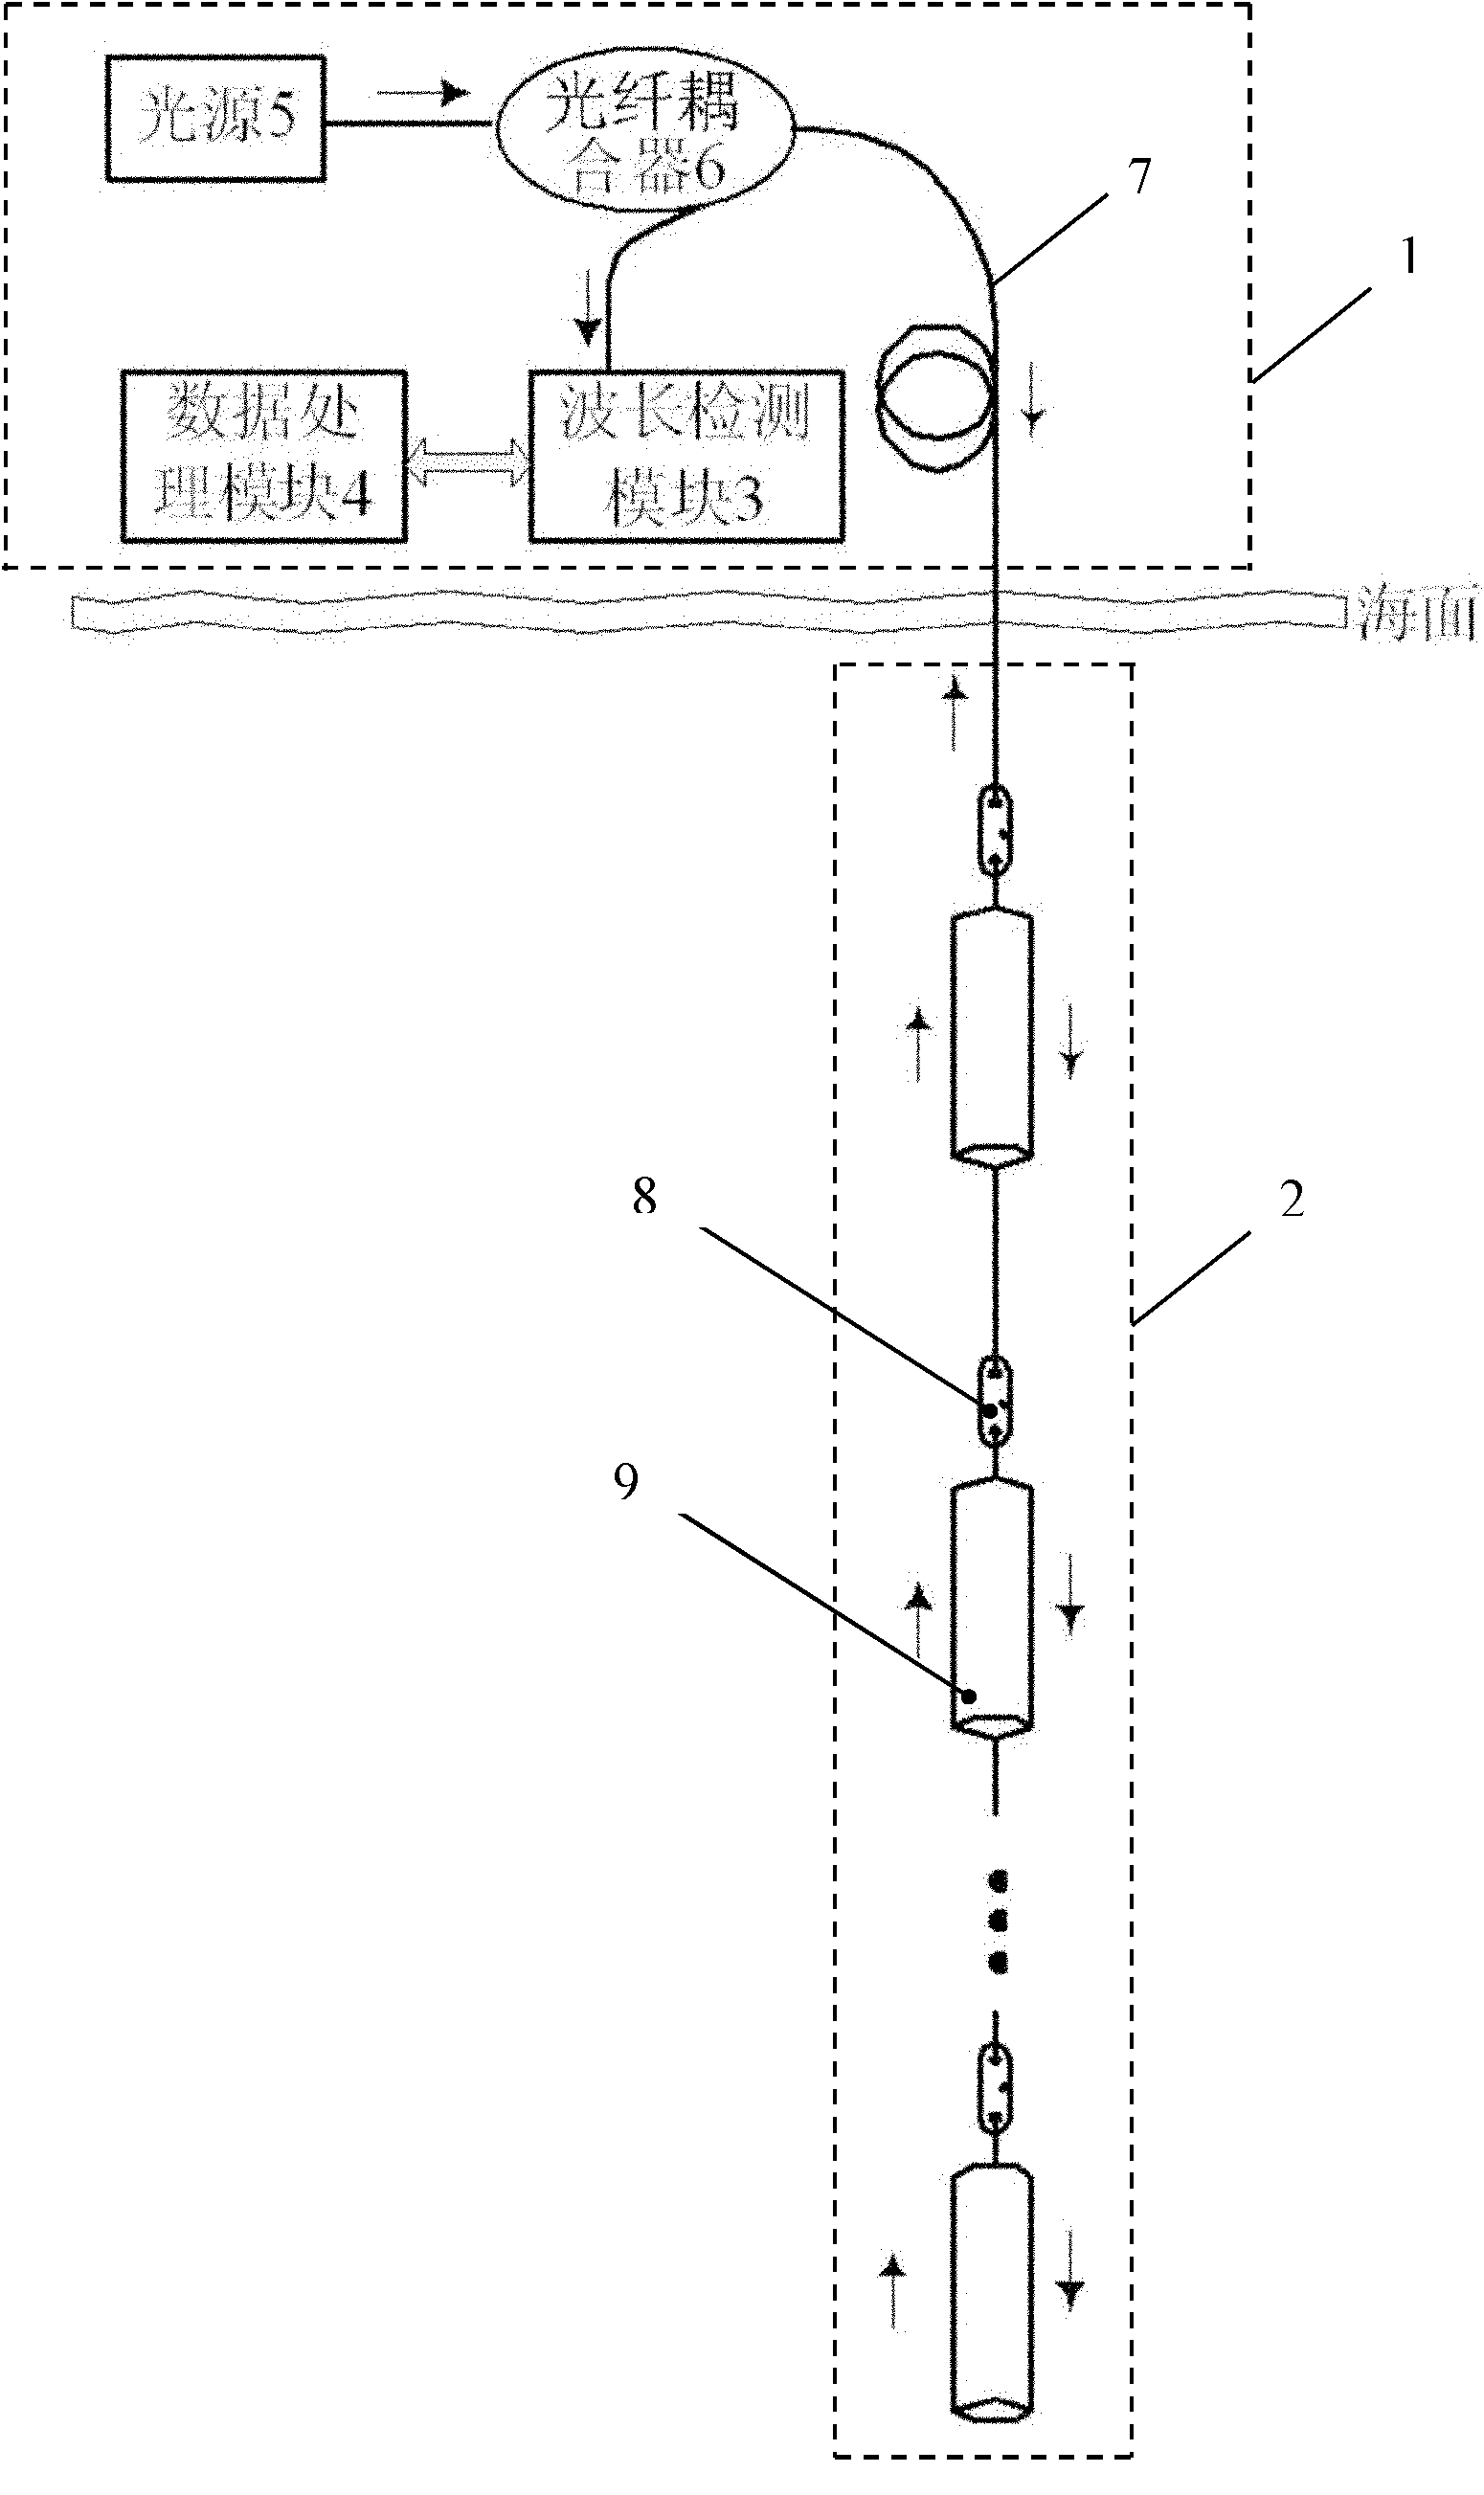 System for detecting temperature and depth of sea water by fiber bragg grating